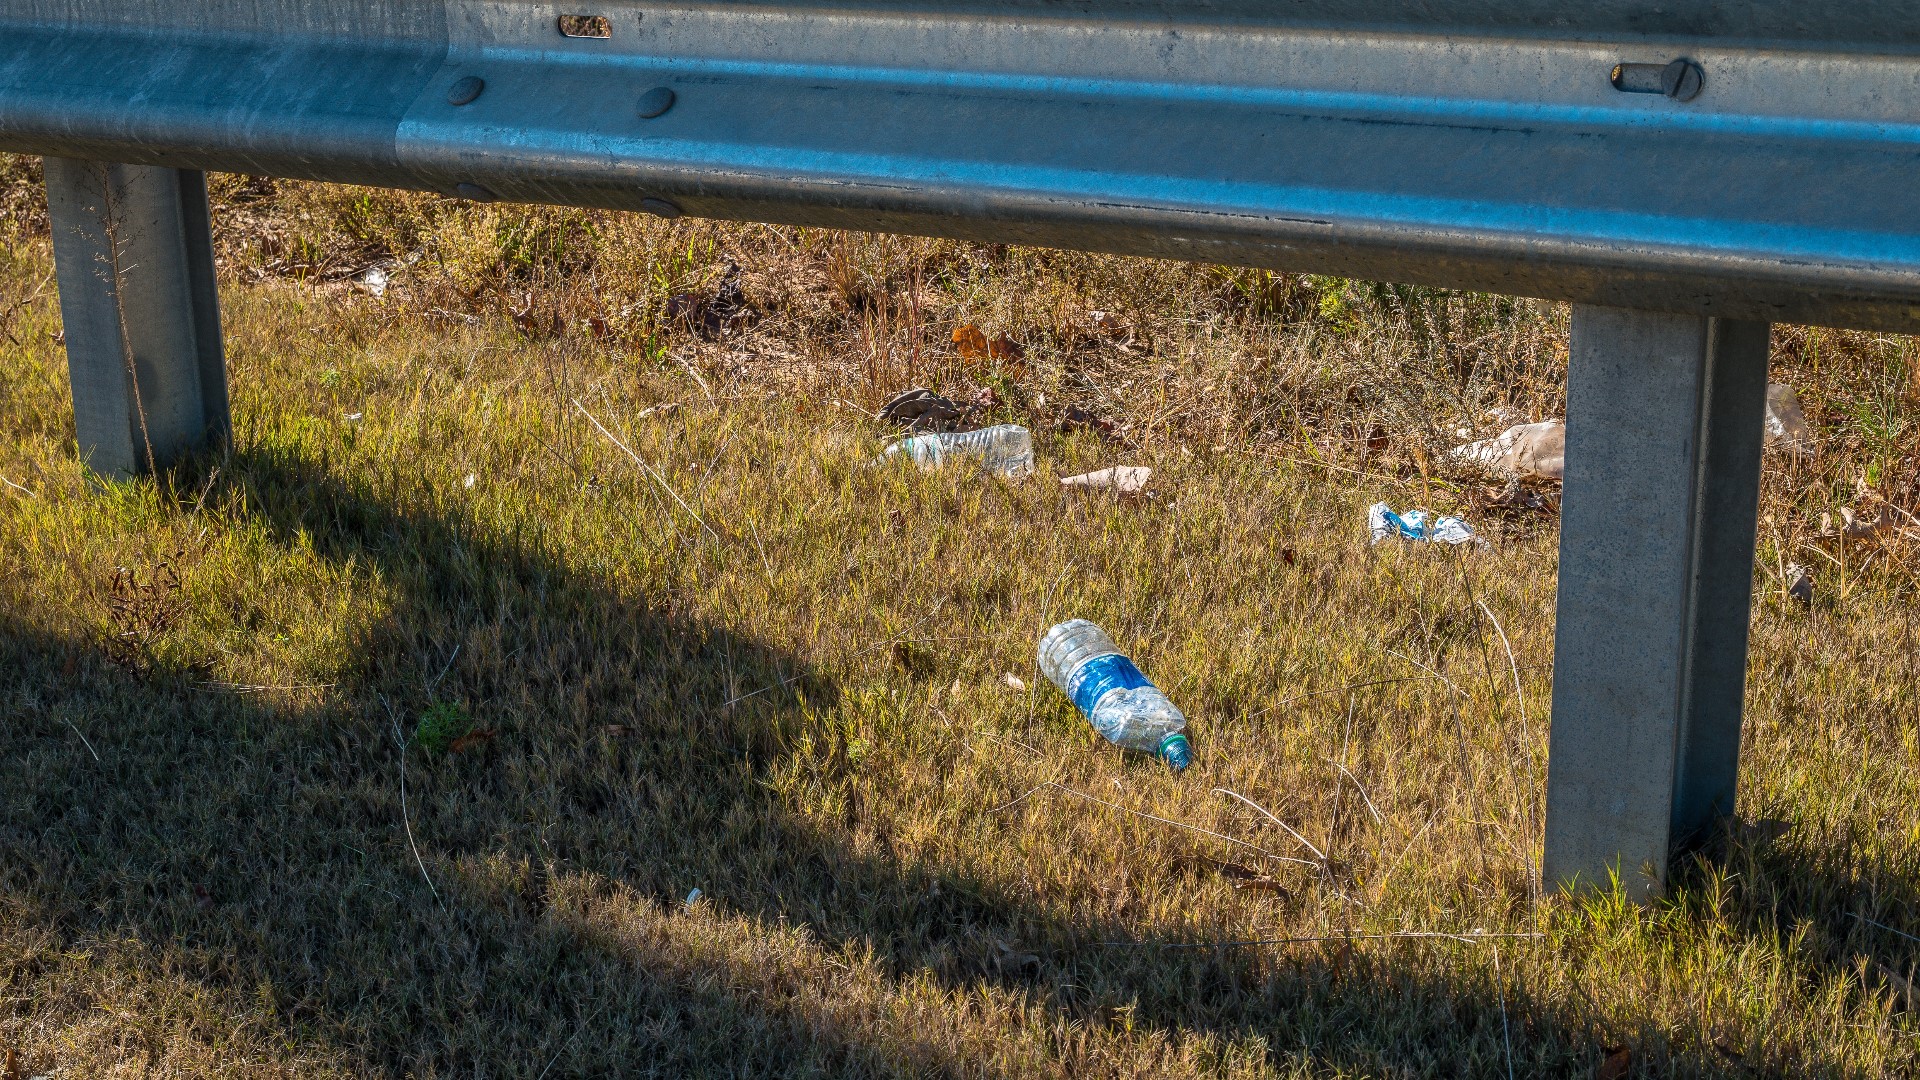 So far in 2021, NCDOT has collected more than 11 million pounds of litter from our roadways. That's a new record, and the year isn't even over yet.